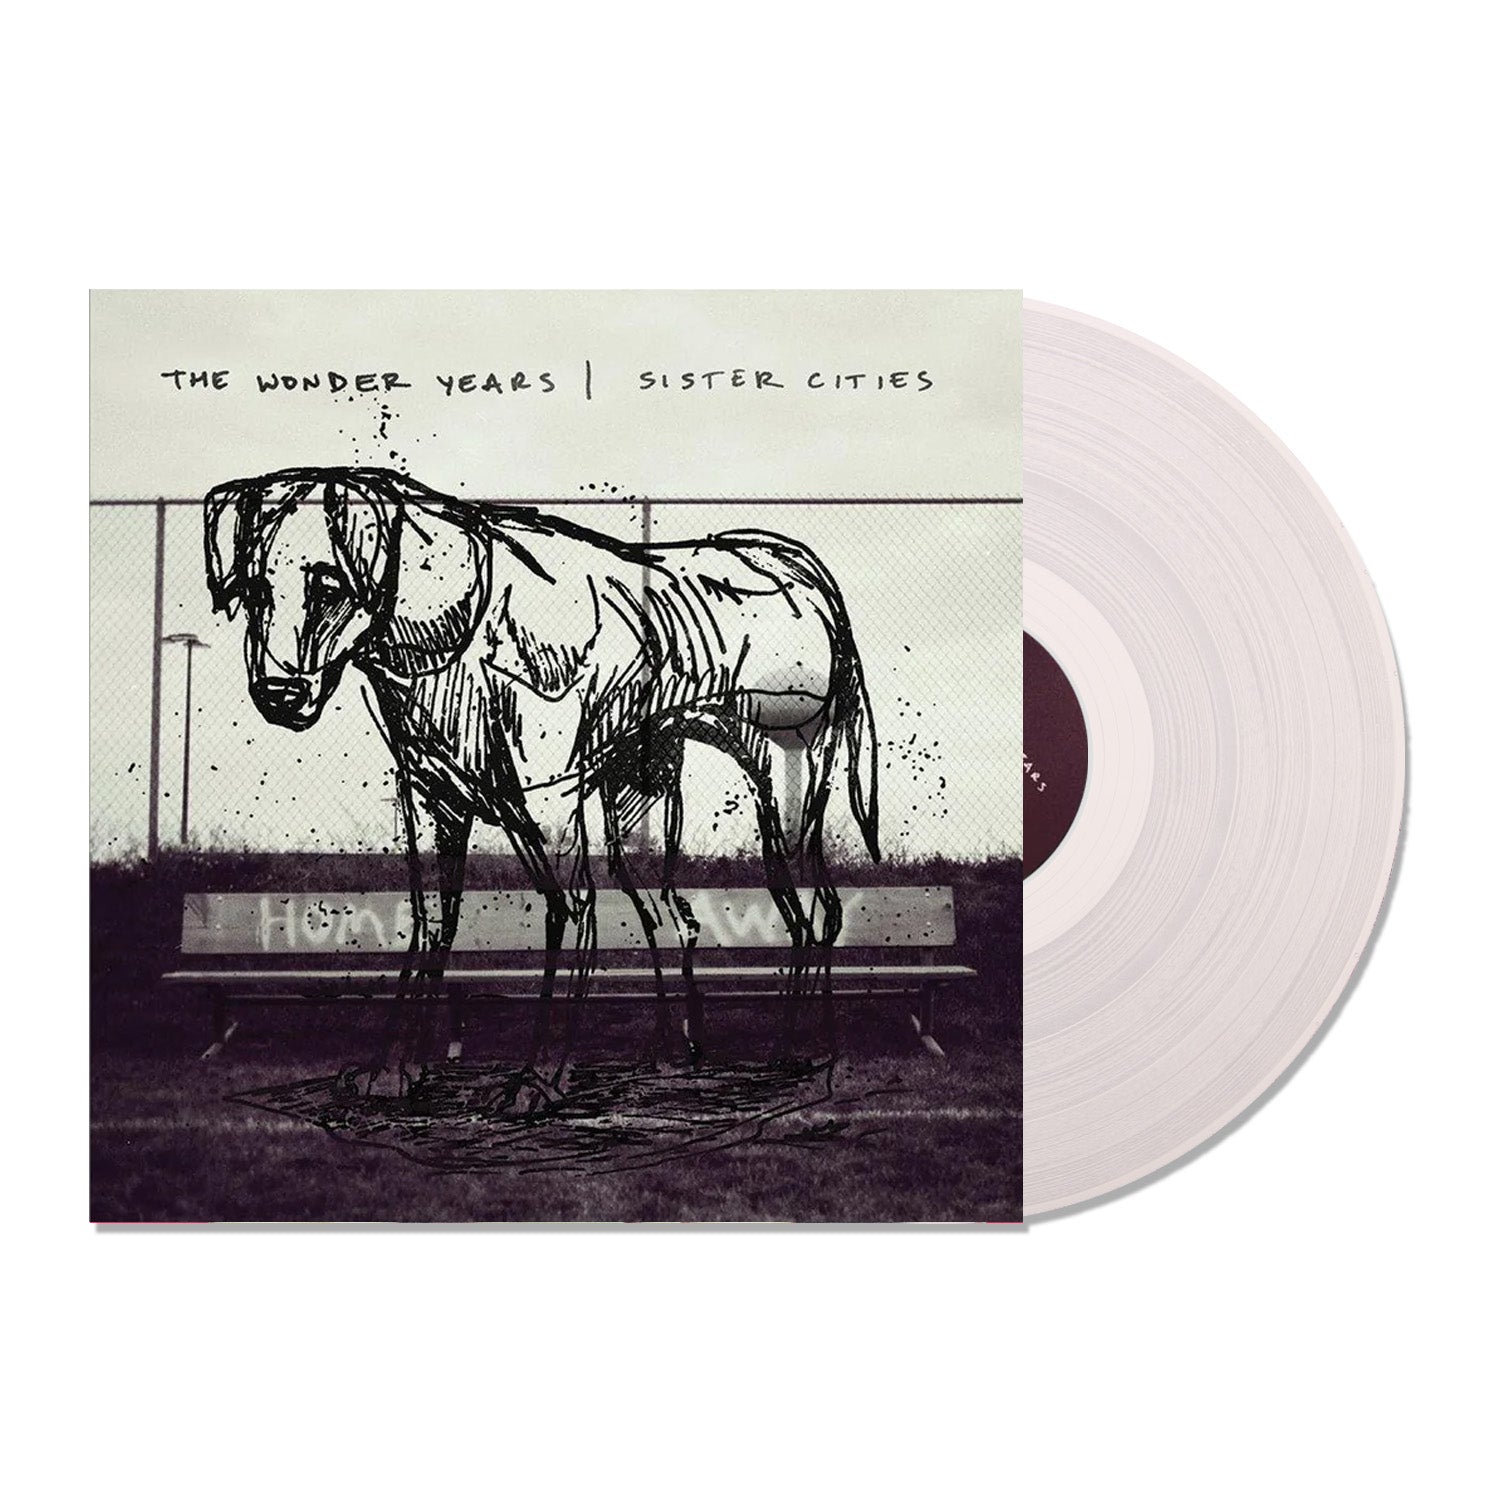 The Wonder Years - Sister Cities: Limited Ultra Clear Vinyl LP